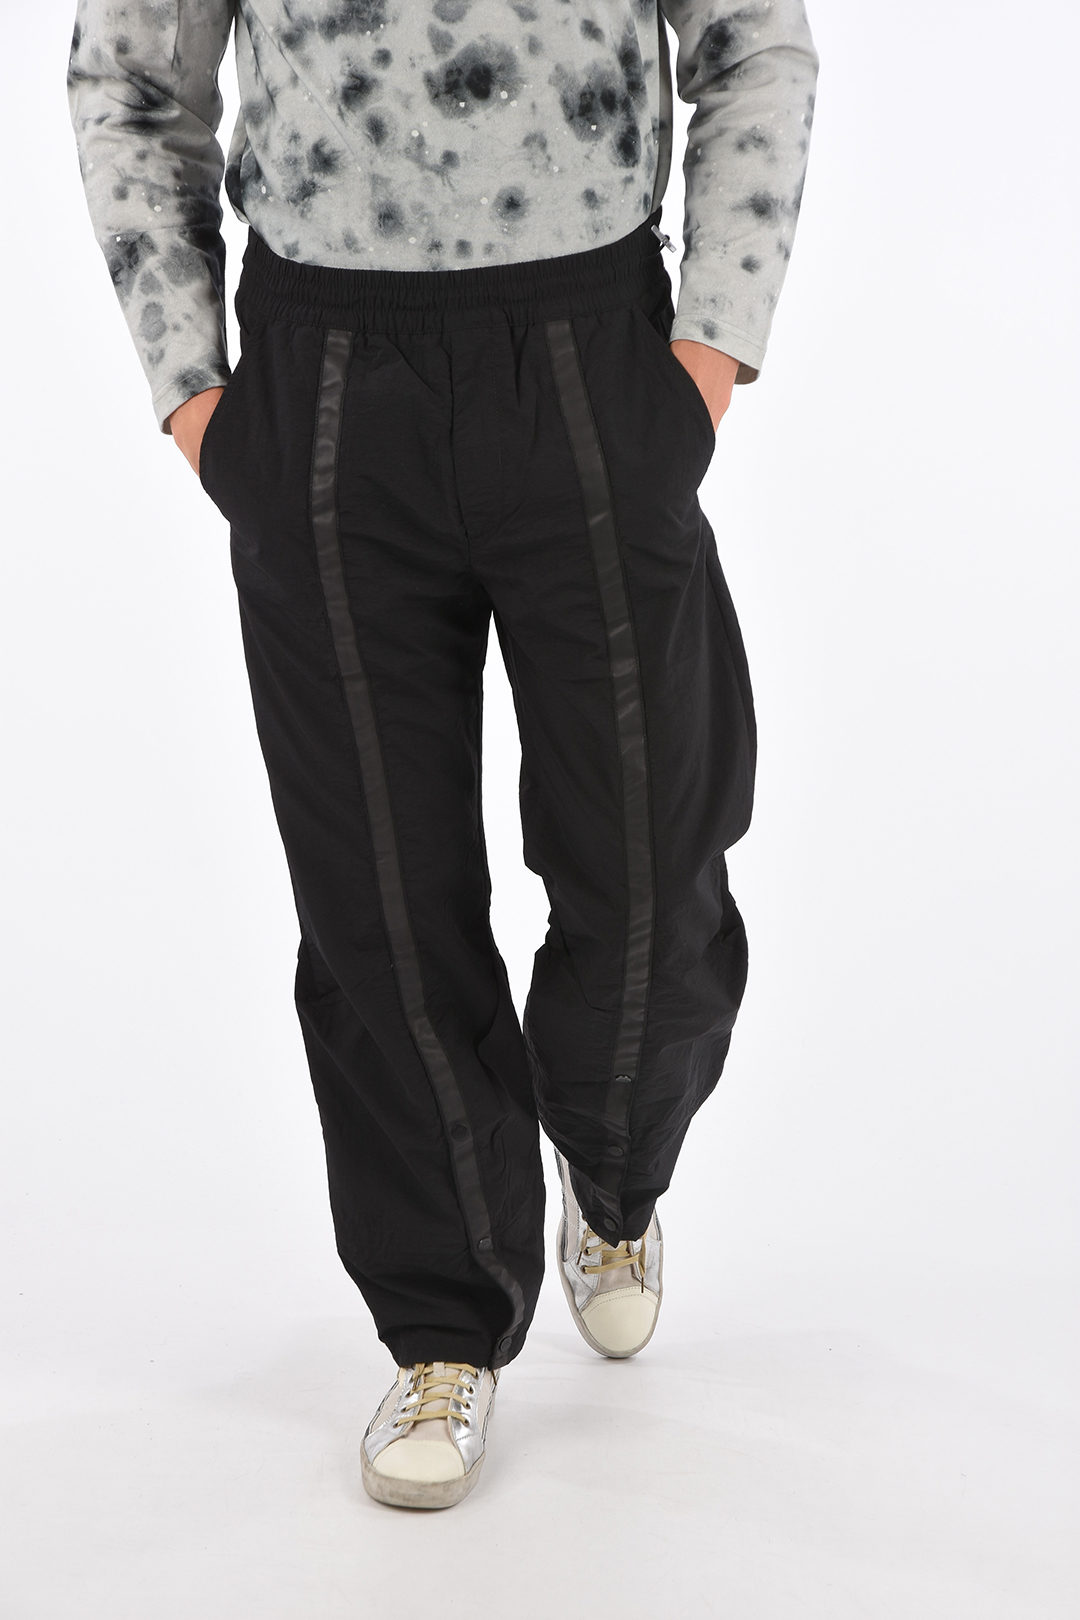 Front Flaps Nylon Trousers A Cold Wall Bottoms Pants Black